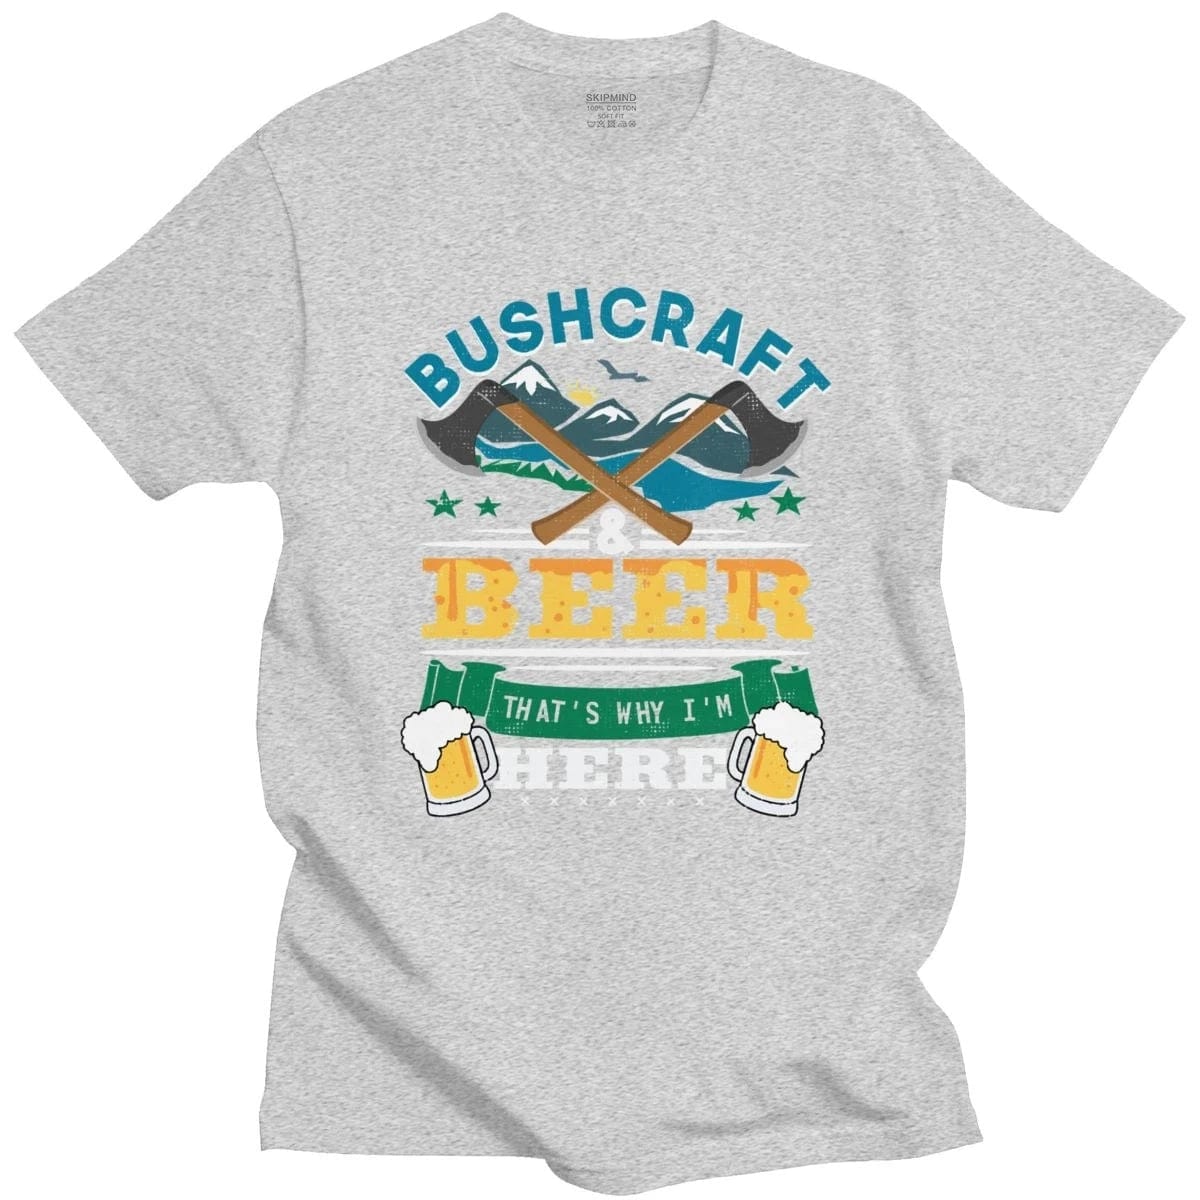 T-Shirt "Bushcraft & Beer That Is Why I Am Here" Weiss / XS prepper-store.com